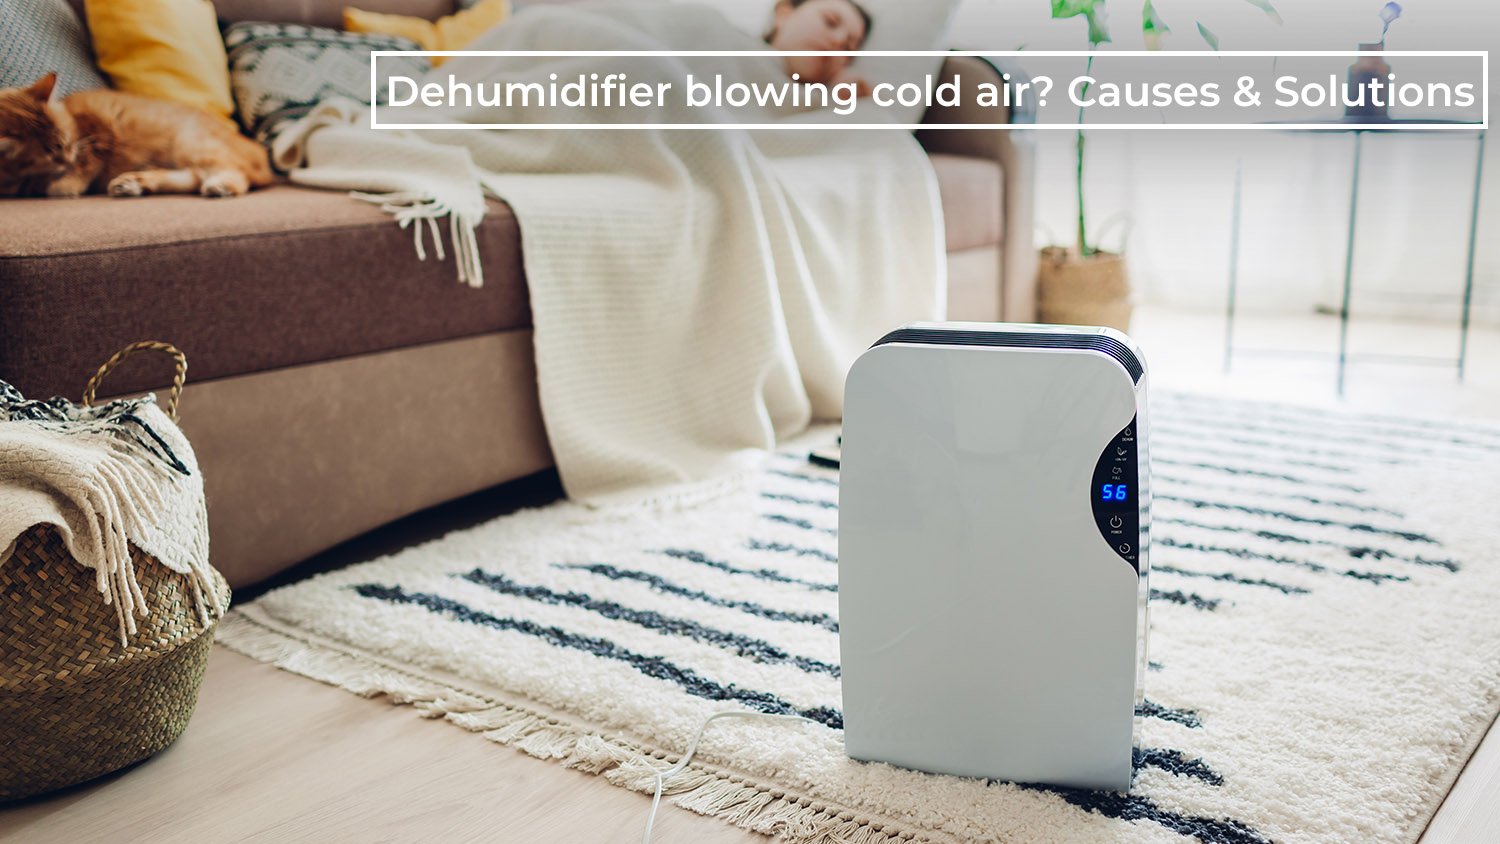 Dehumidifier blowing cold air? Causes & Solutions